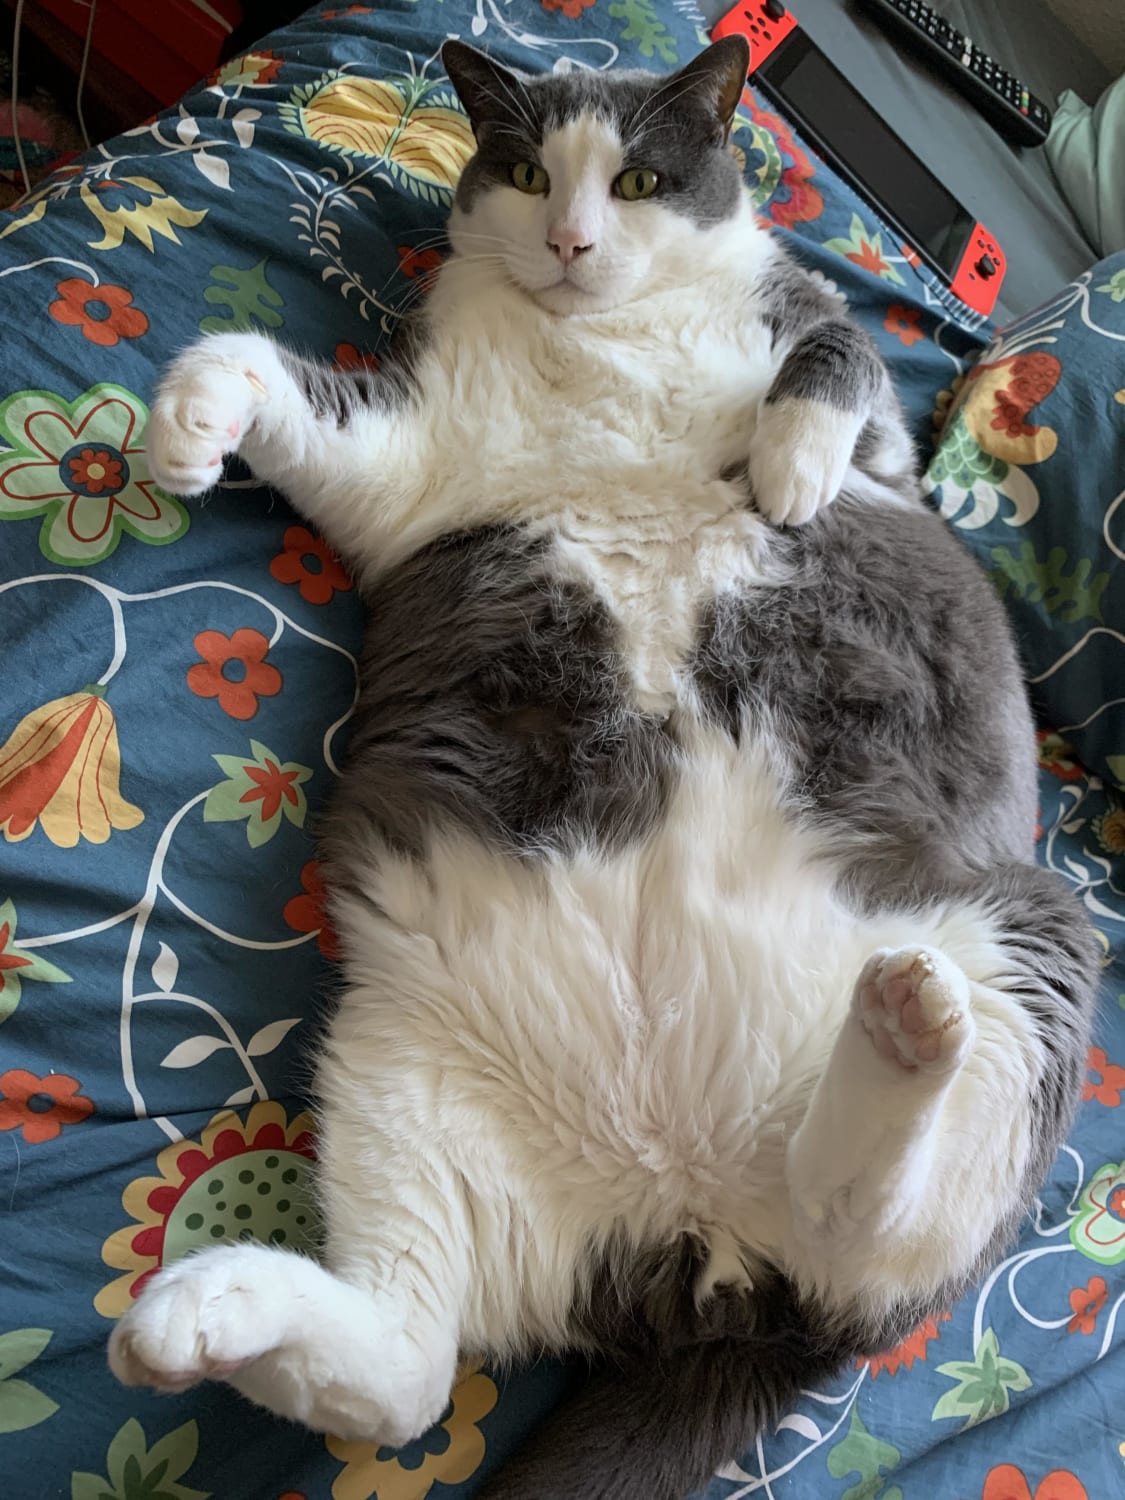 adopted this chonker last year (he’s on a diet now!) thought I’d share him with everyone ❤️